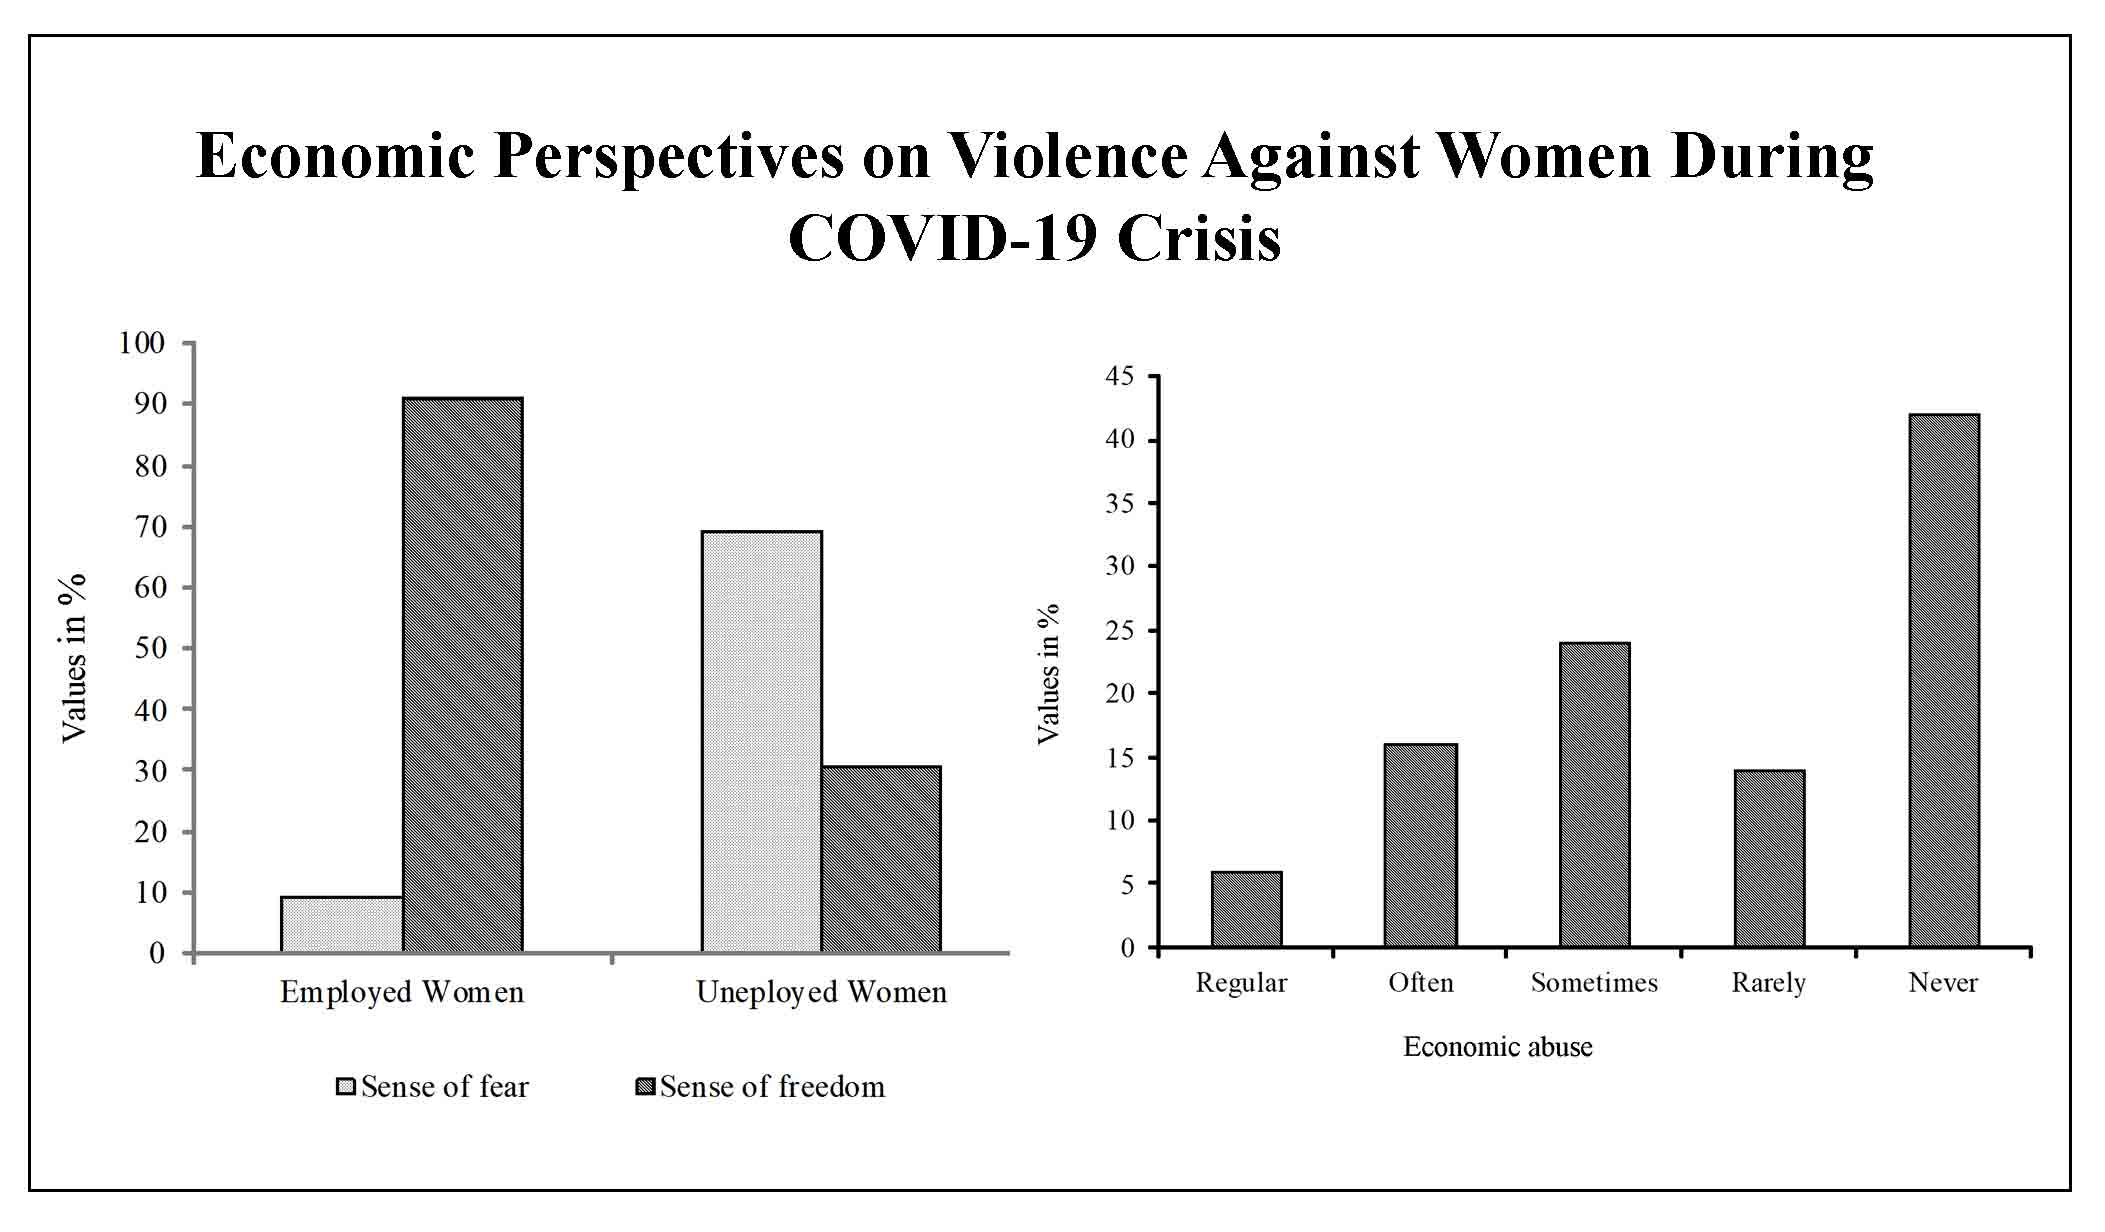 Economic Perspectives on Violence Against Women During COVID-19 Crisis: A Case Study of Bihar